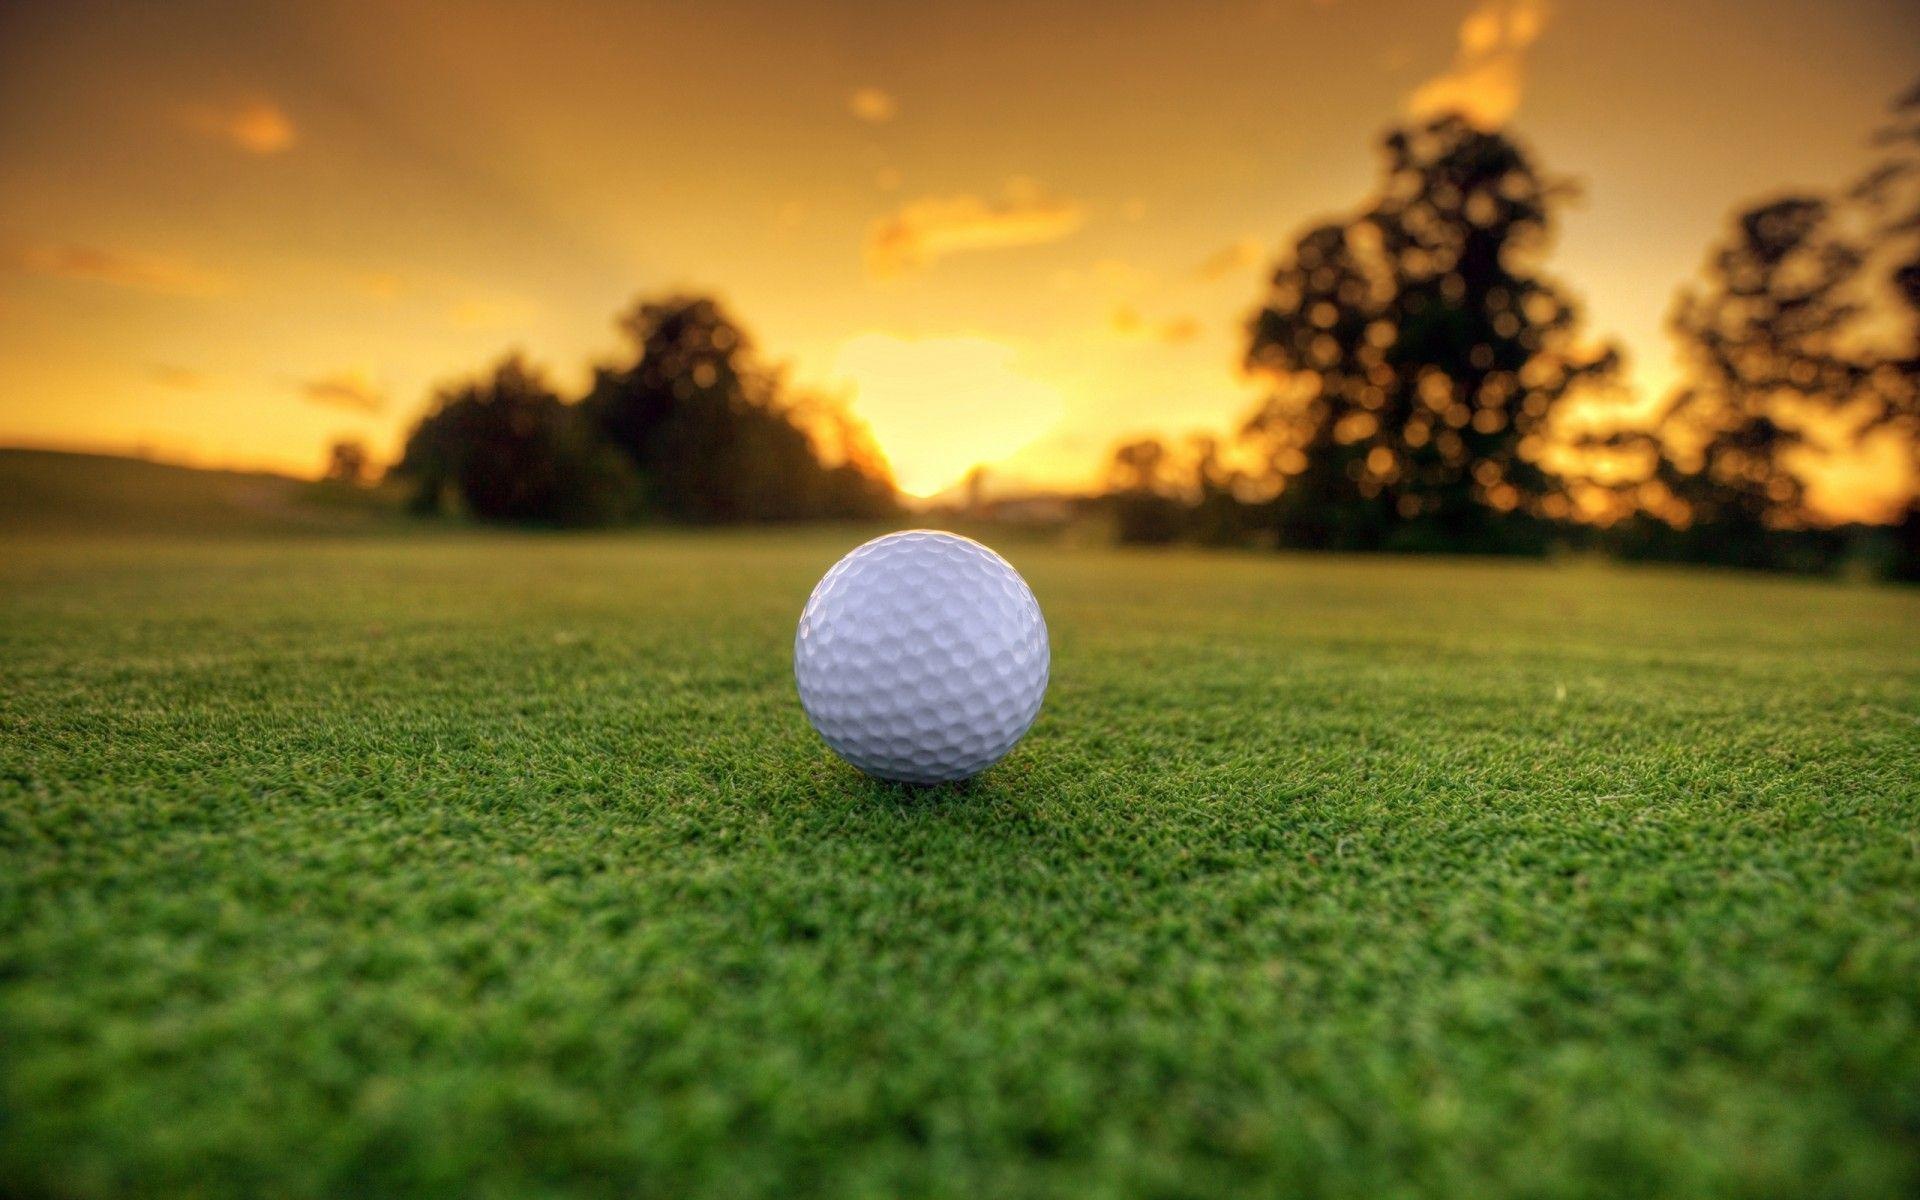 Golf Course: A game in which a small white ball is hit across open ground and into small holes by means of clubs. 1920x1200 HD Background.